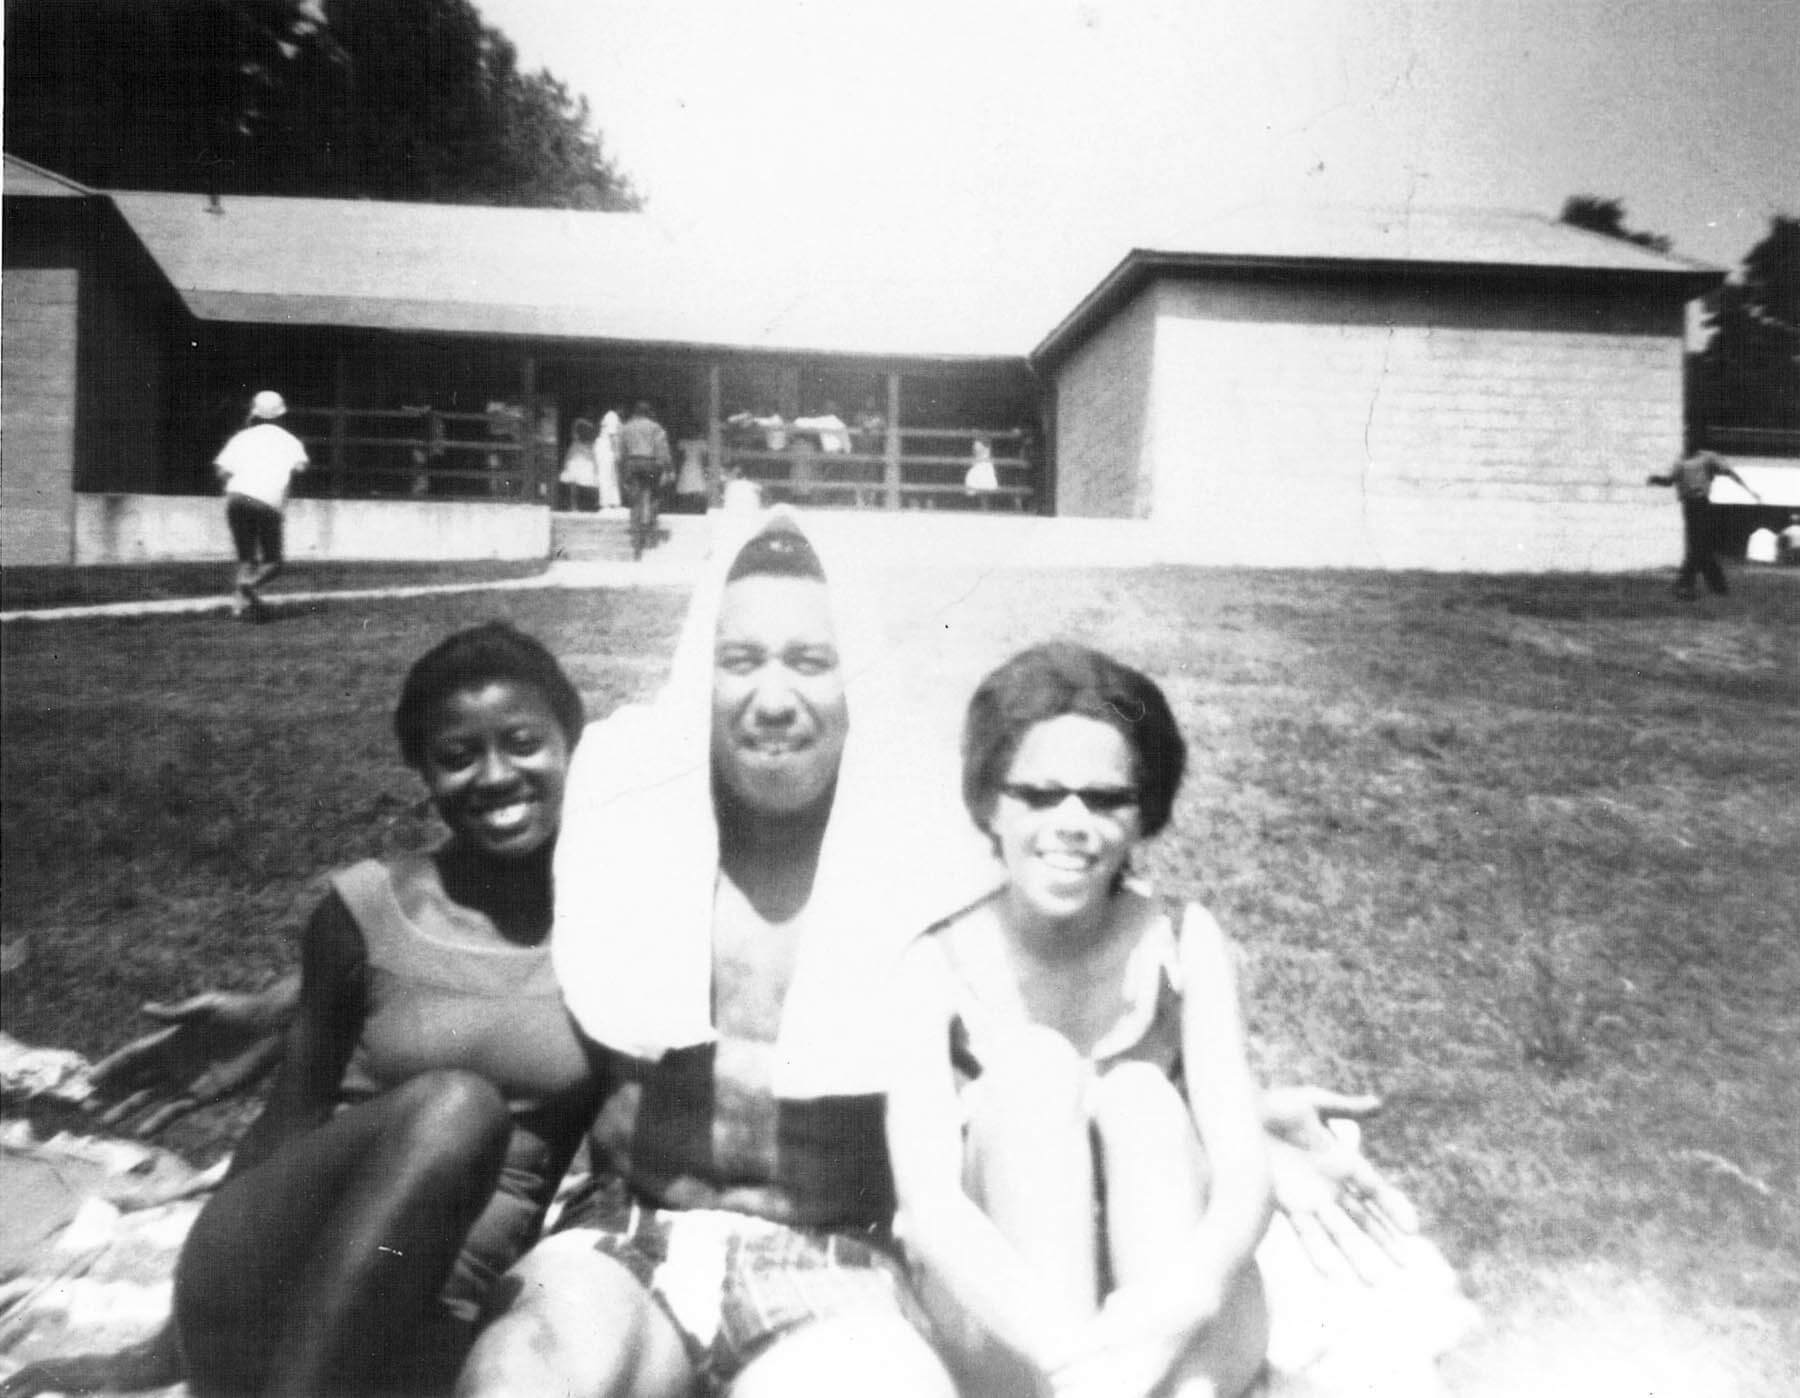 Three park visitors pose in the lawn wearing bathing suits.